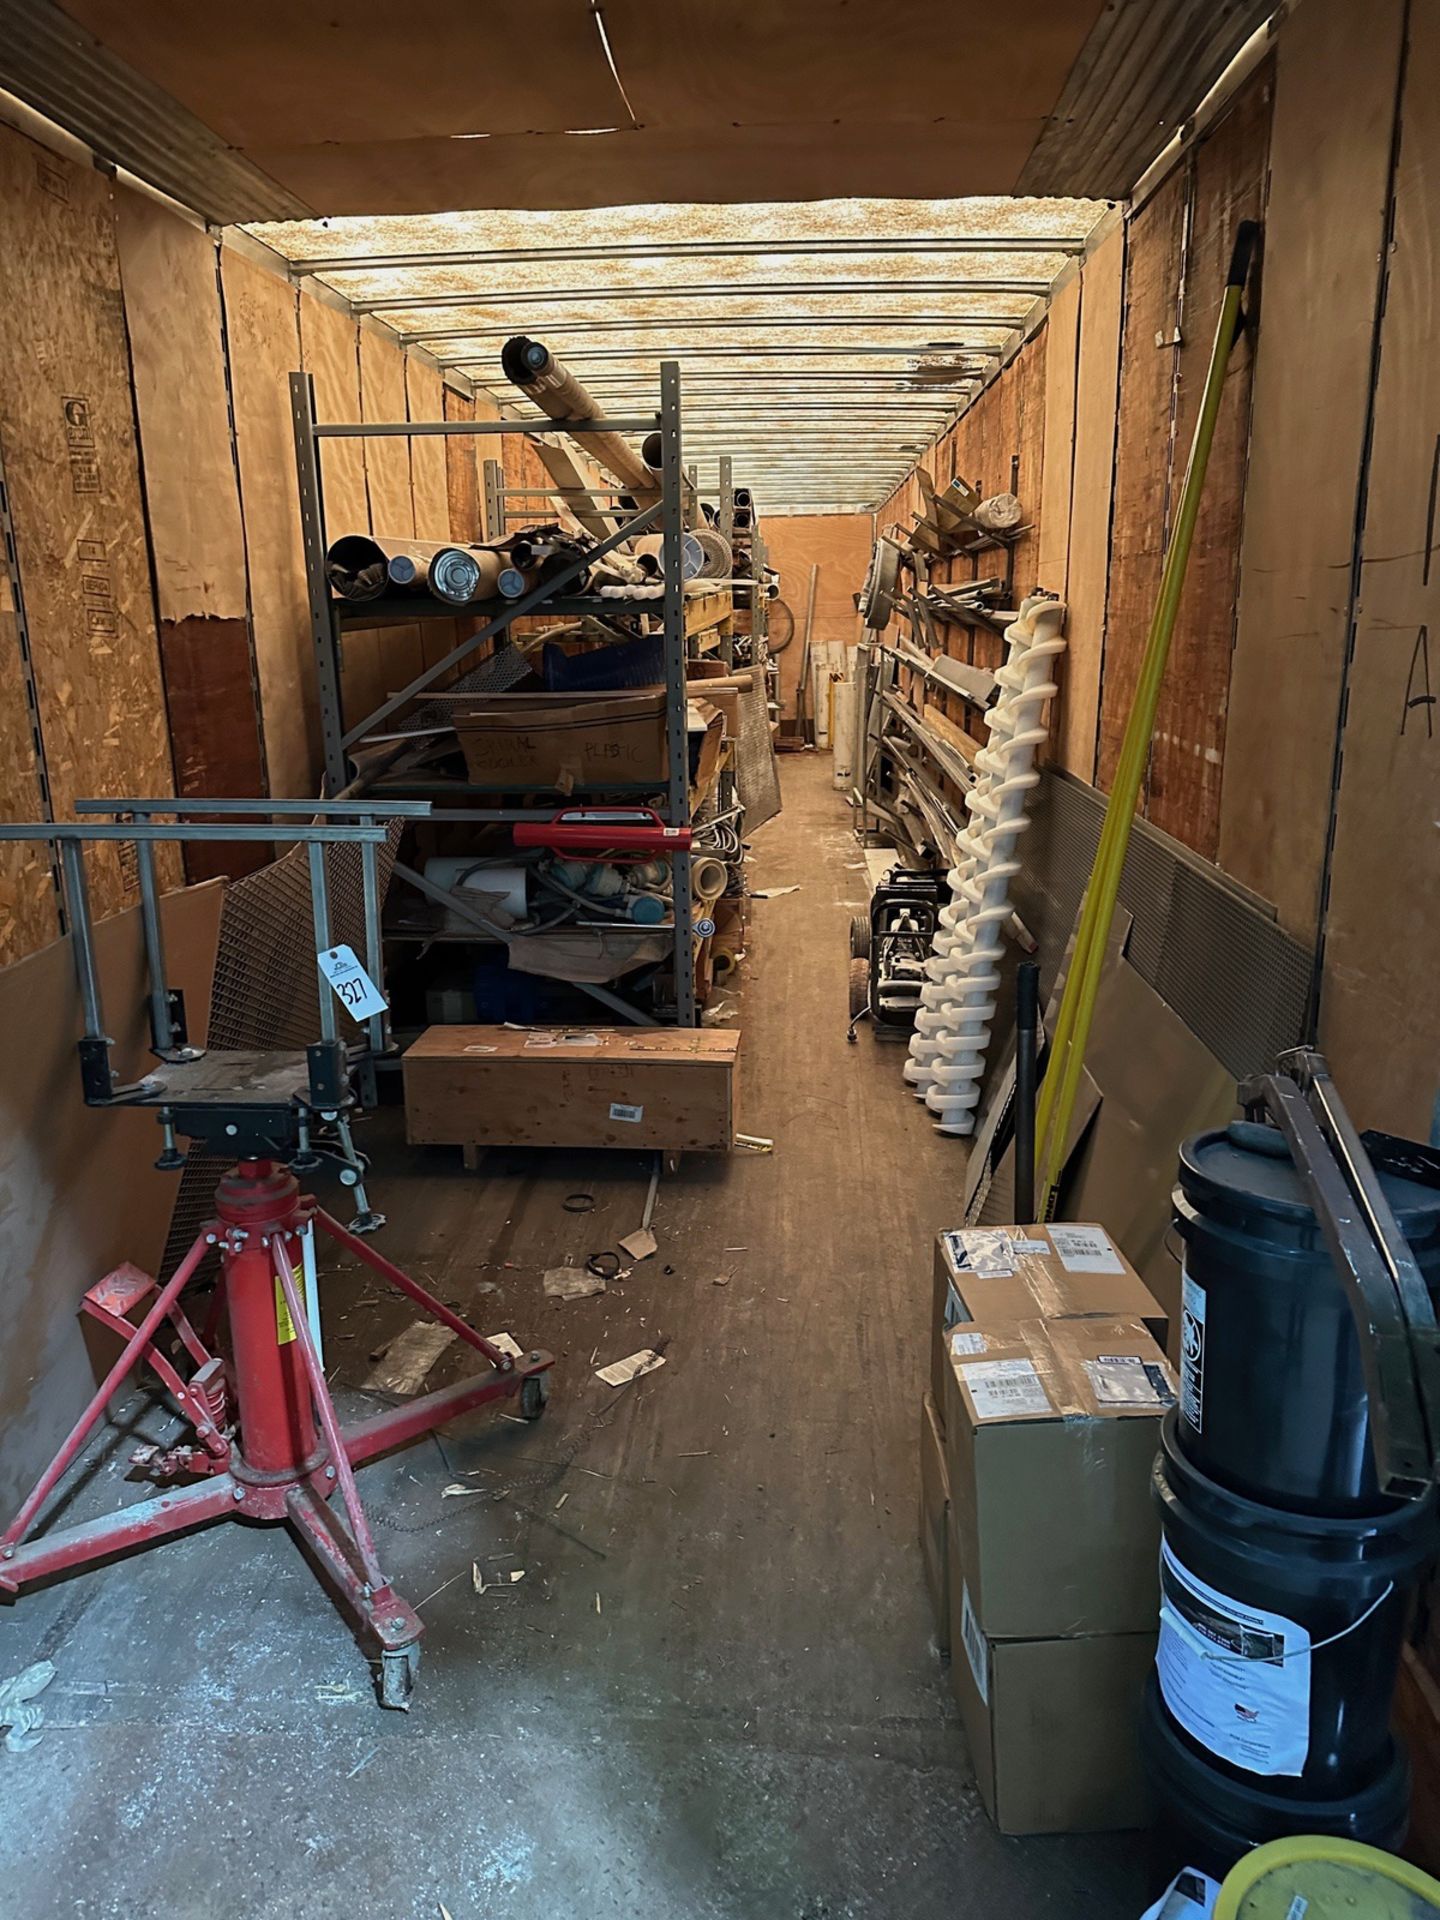 Lot of Trailer Contents and Shelving Units